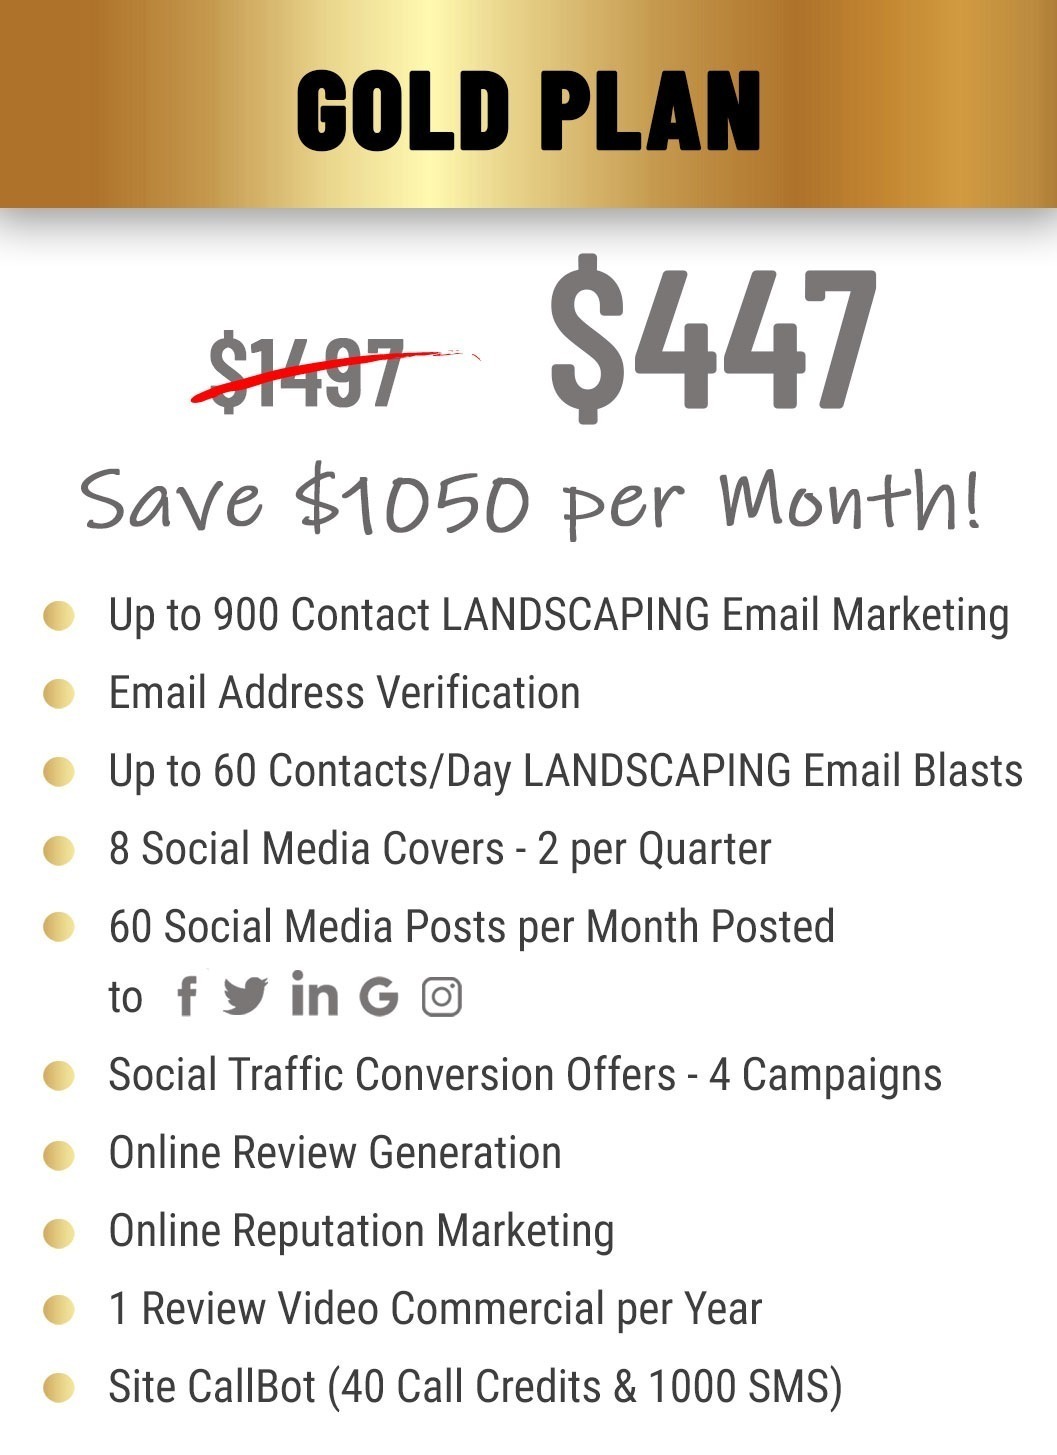 gold plan $447 per month pricing and features for landscaping contractors.